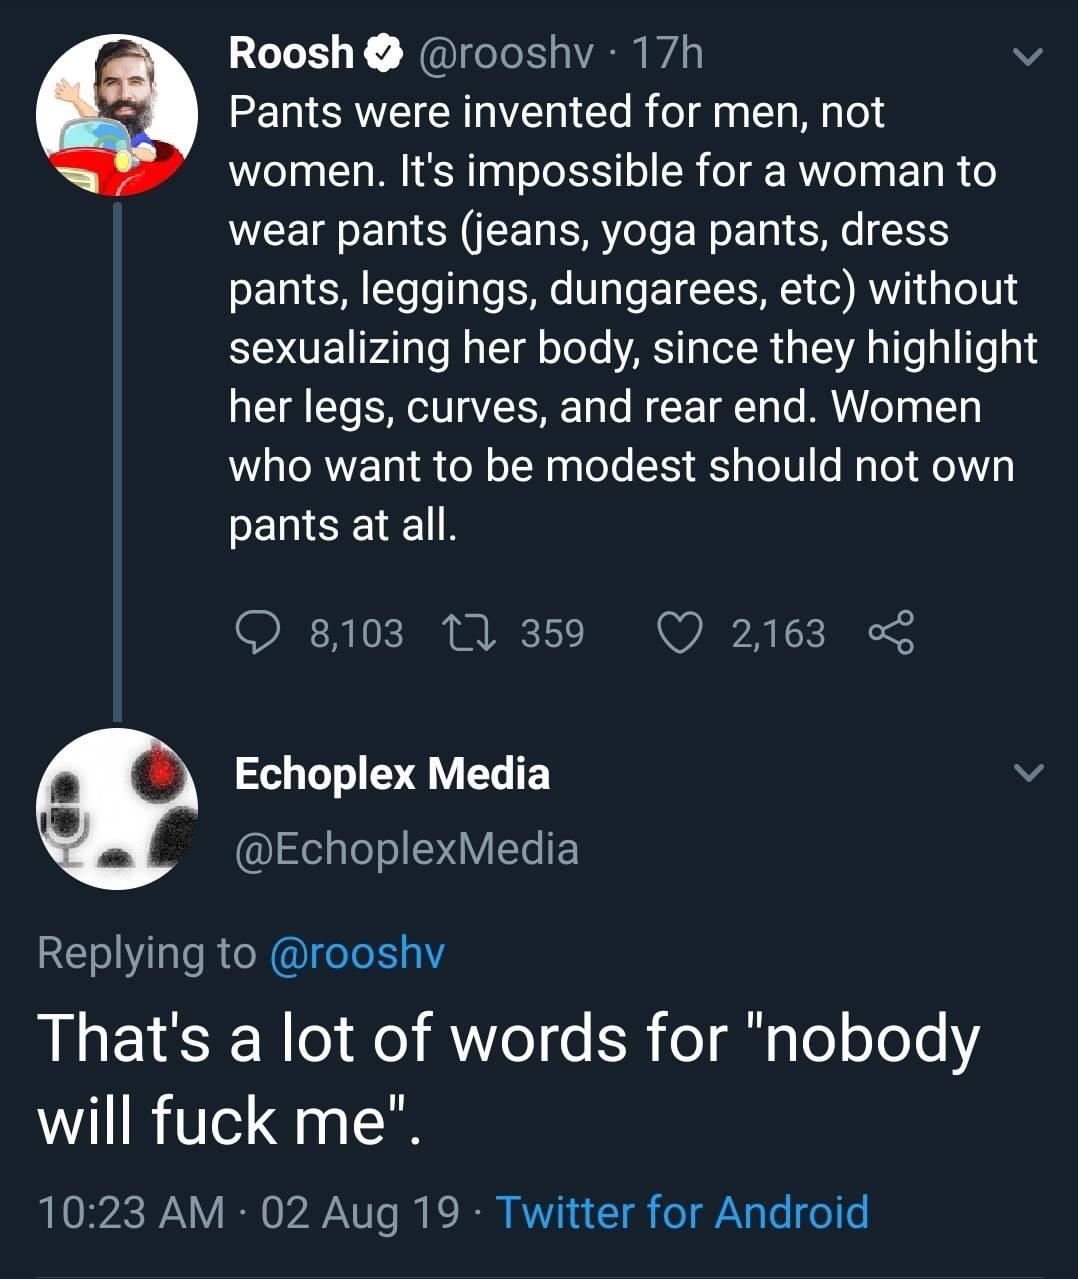 screenshot - Roosh 17h Pants were invented for men, not women. It's impossible for a woman to wear pants jeans, yoga pants, dress pants, leggings, dungarees, etc without sexualizing her body, since they highlight her legs, curves, and rear end. Women who 